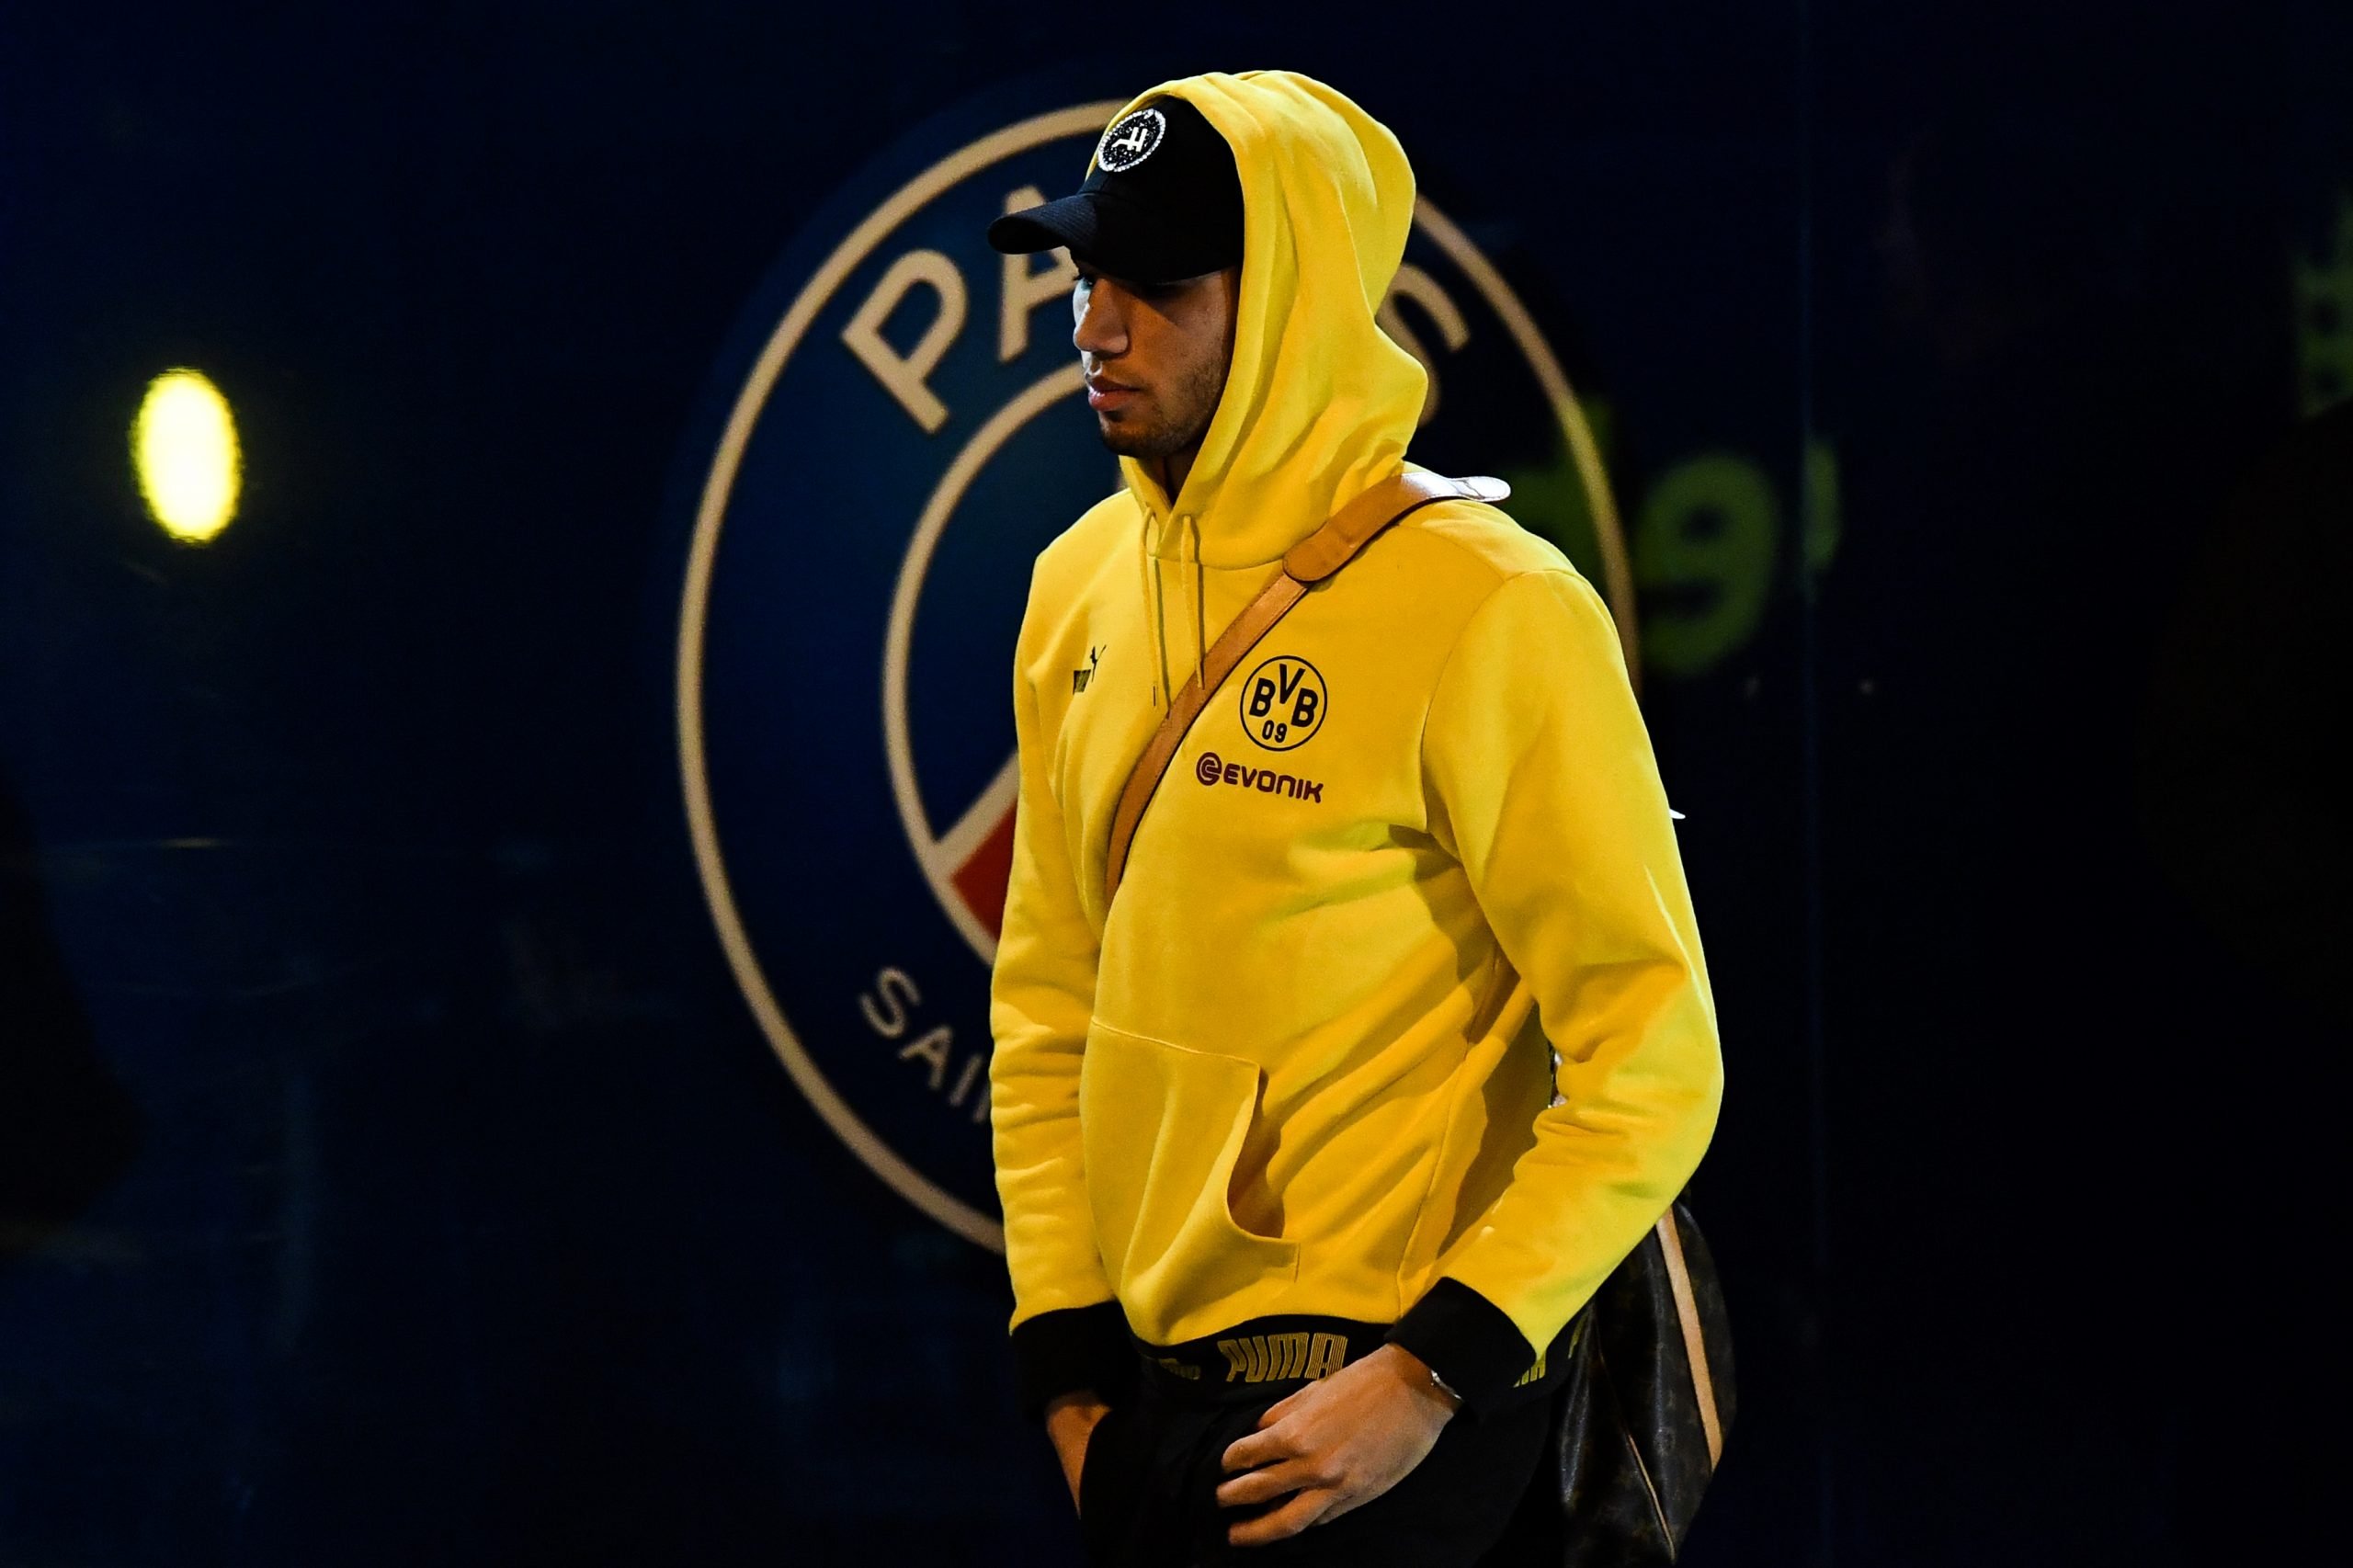 Dortmund's Moroccan defender Achraf Hakimi arrives to attend the UEFA Champions League round of 16 second leg football match between Paris Saint-Germain (PSG) and Borussia Dortmund, outside the Parc des Princes stadium, in Paris, on March 11, 2020. - The match between Paris Saint-Germain (PSG) and Borussia Dortmund, is held behind closed doors due to the spread of COVID-19, the novel coronavirus. (Photo by FRANCK FIFE/AFP via Getty Images)